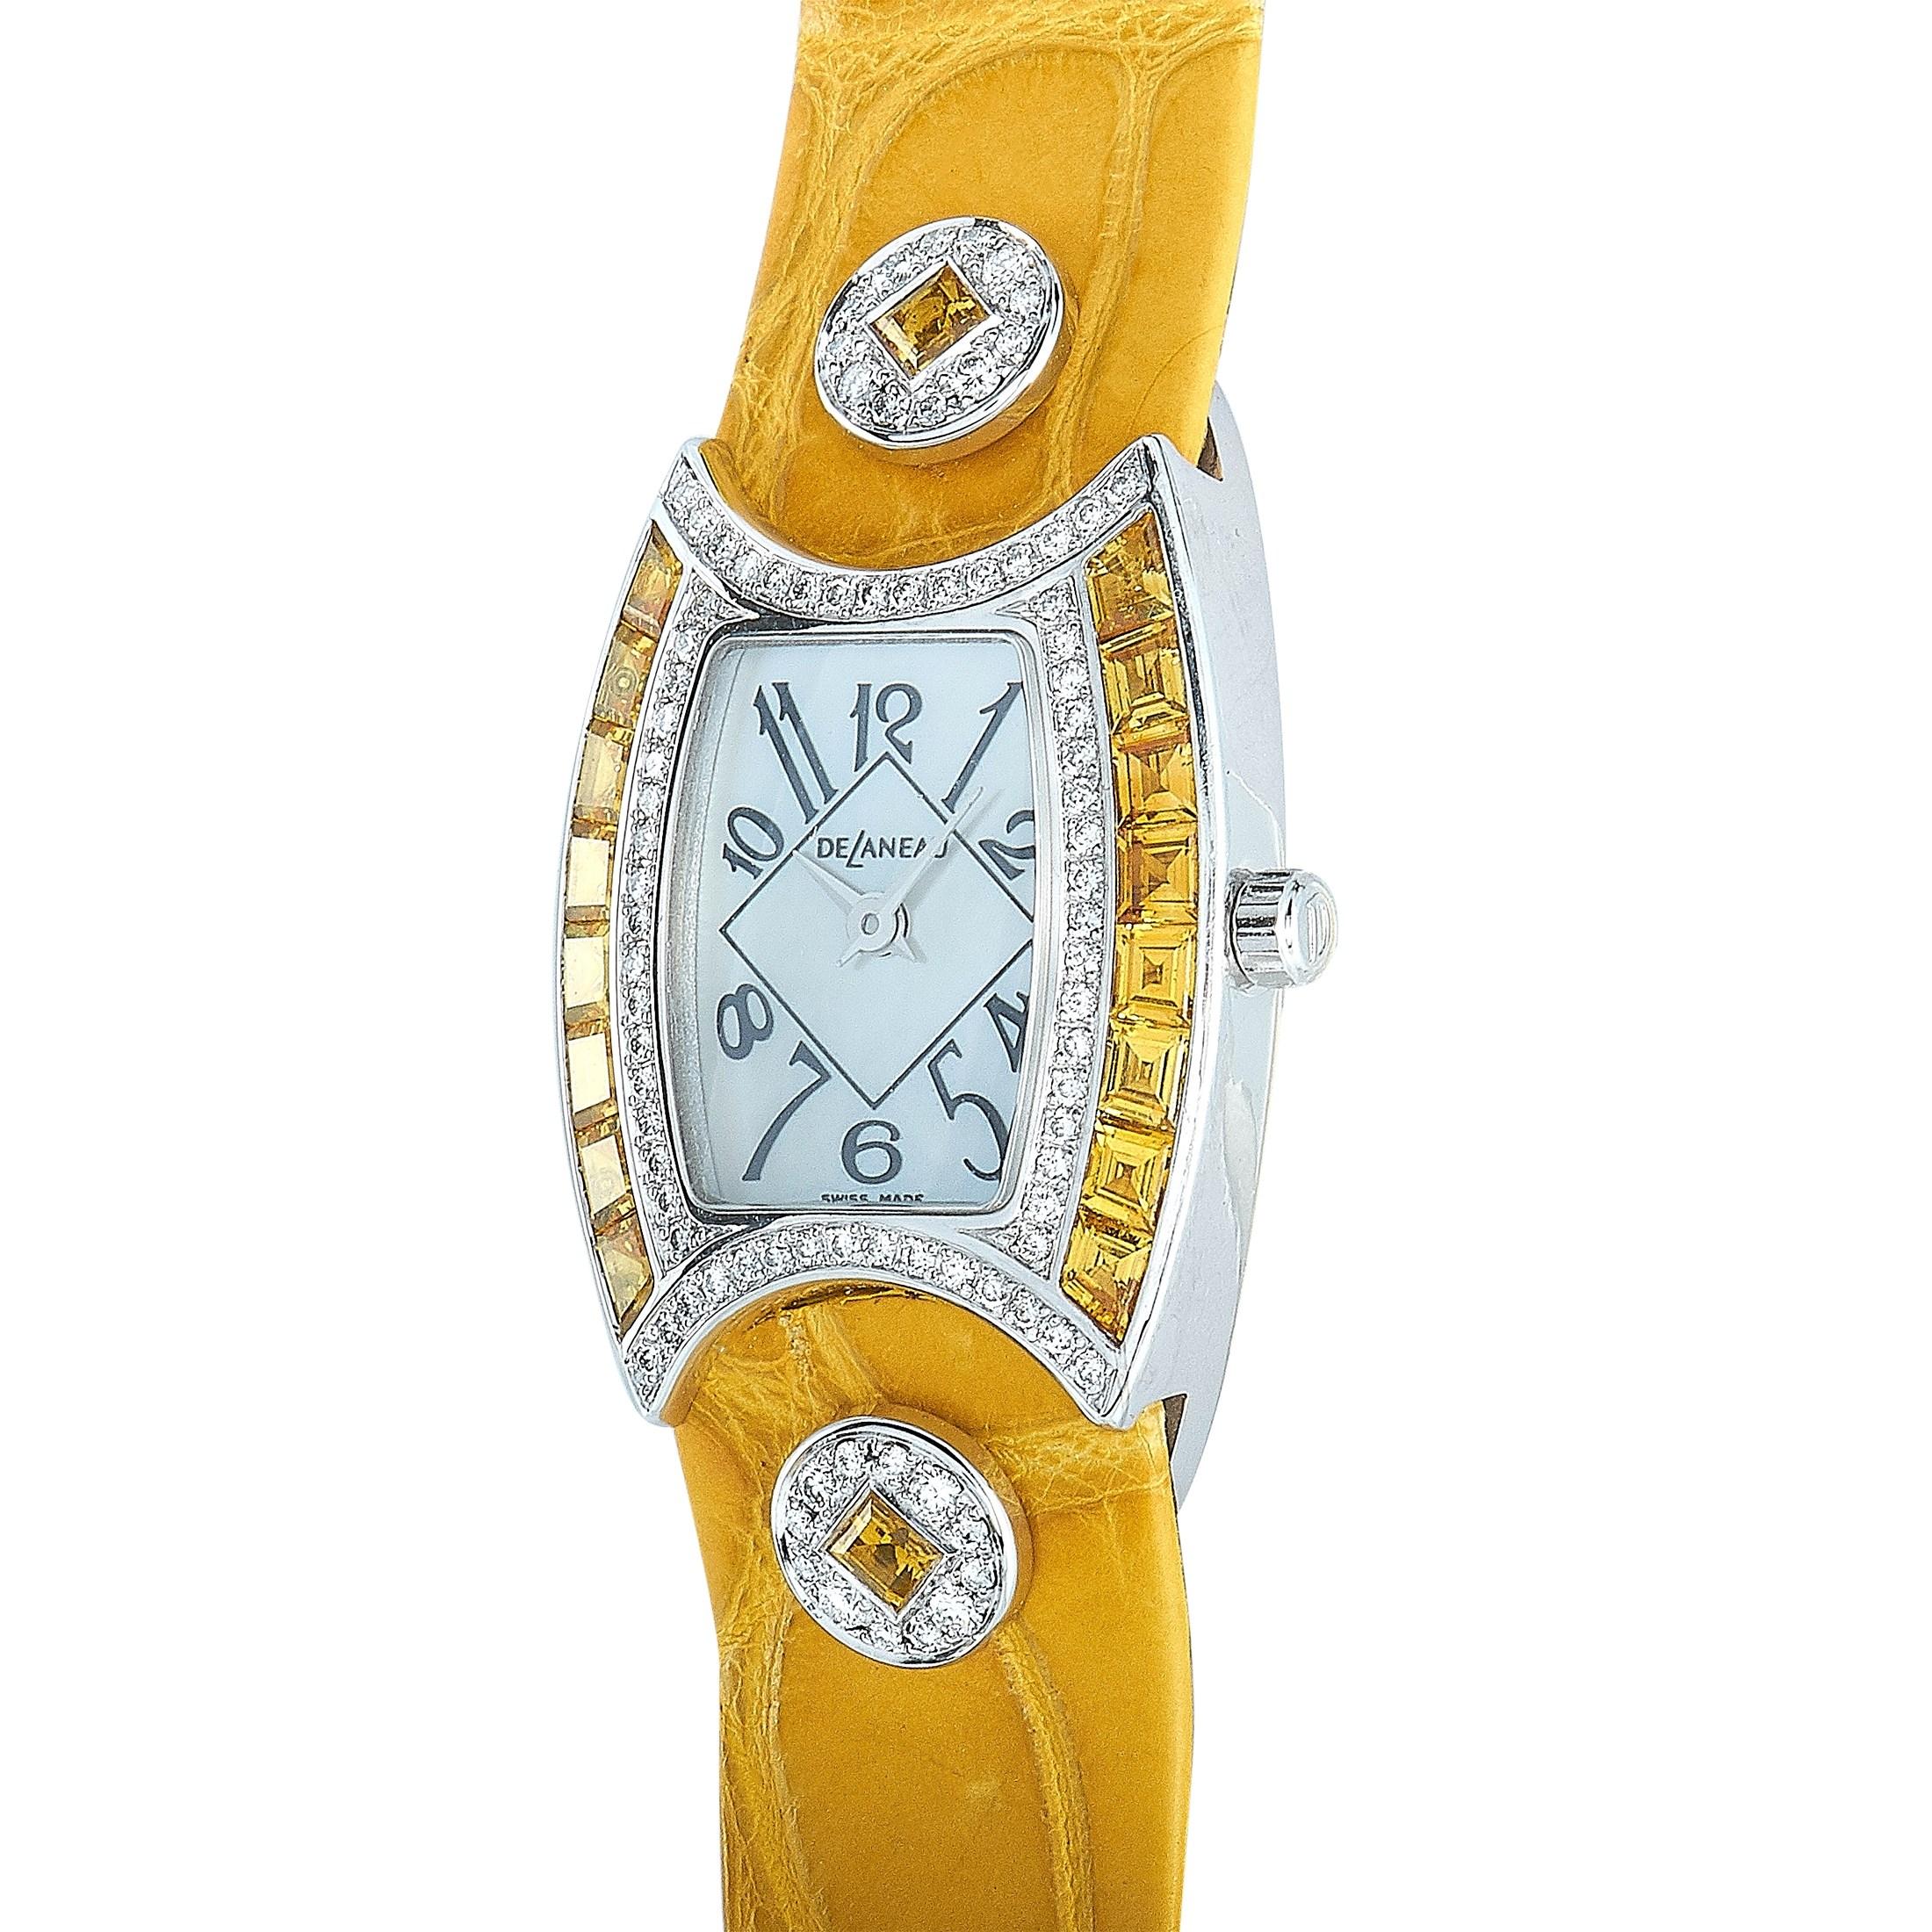 The DeLaneau First Lady watch, reference number LFL074 WG NN082, is presented with an 18K white gold case set with diamonds and yellow gems. This model is powered by a quartz movement and indicates hours and minutes on the white dial with Arabic